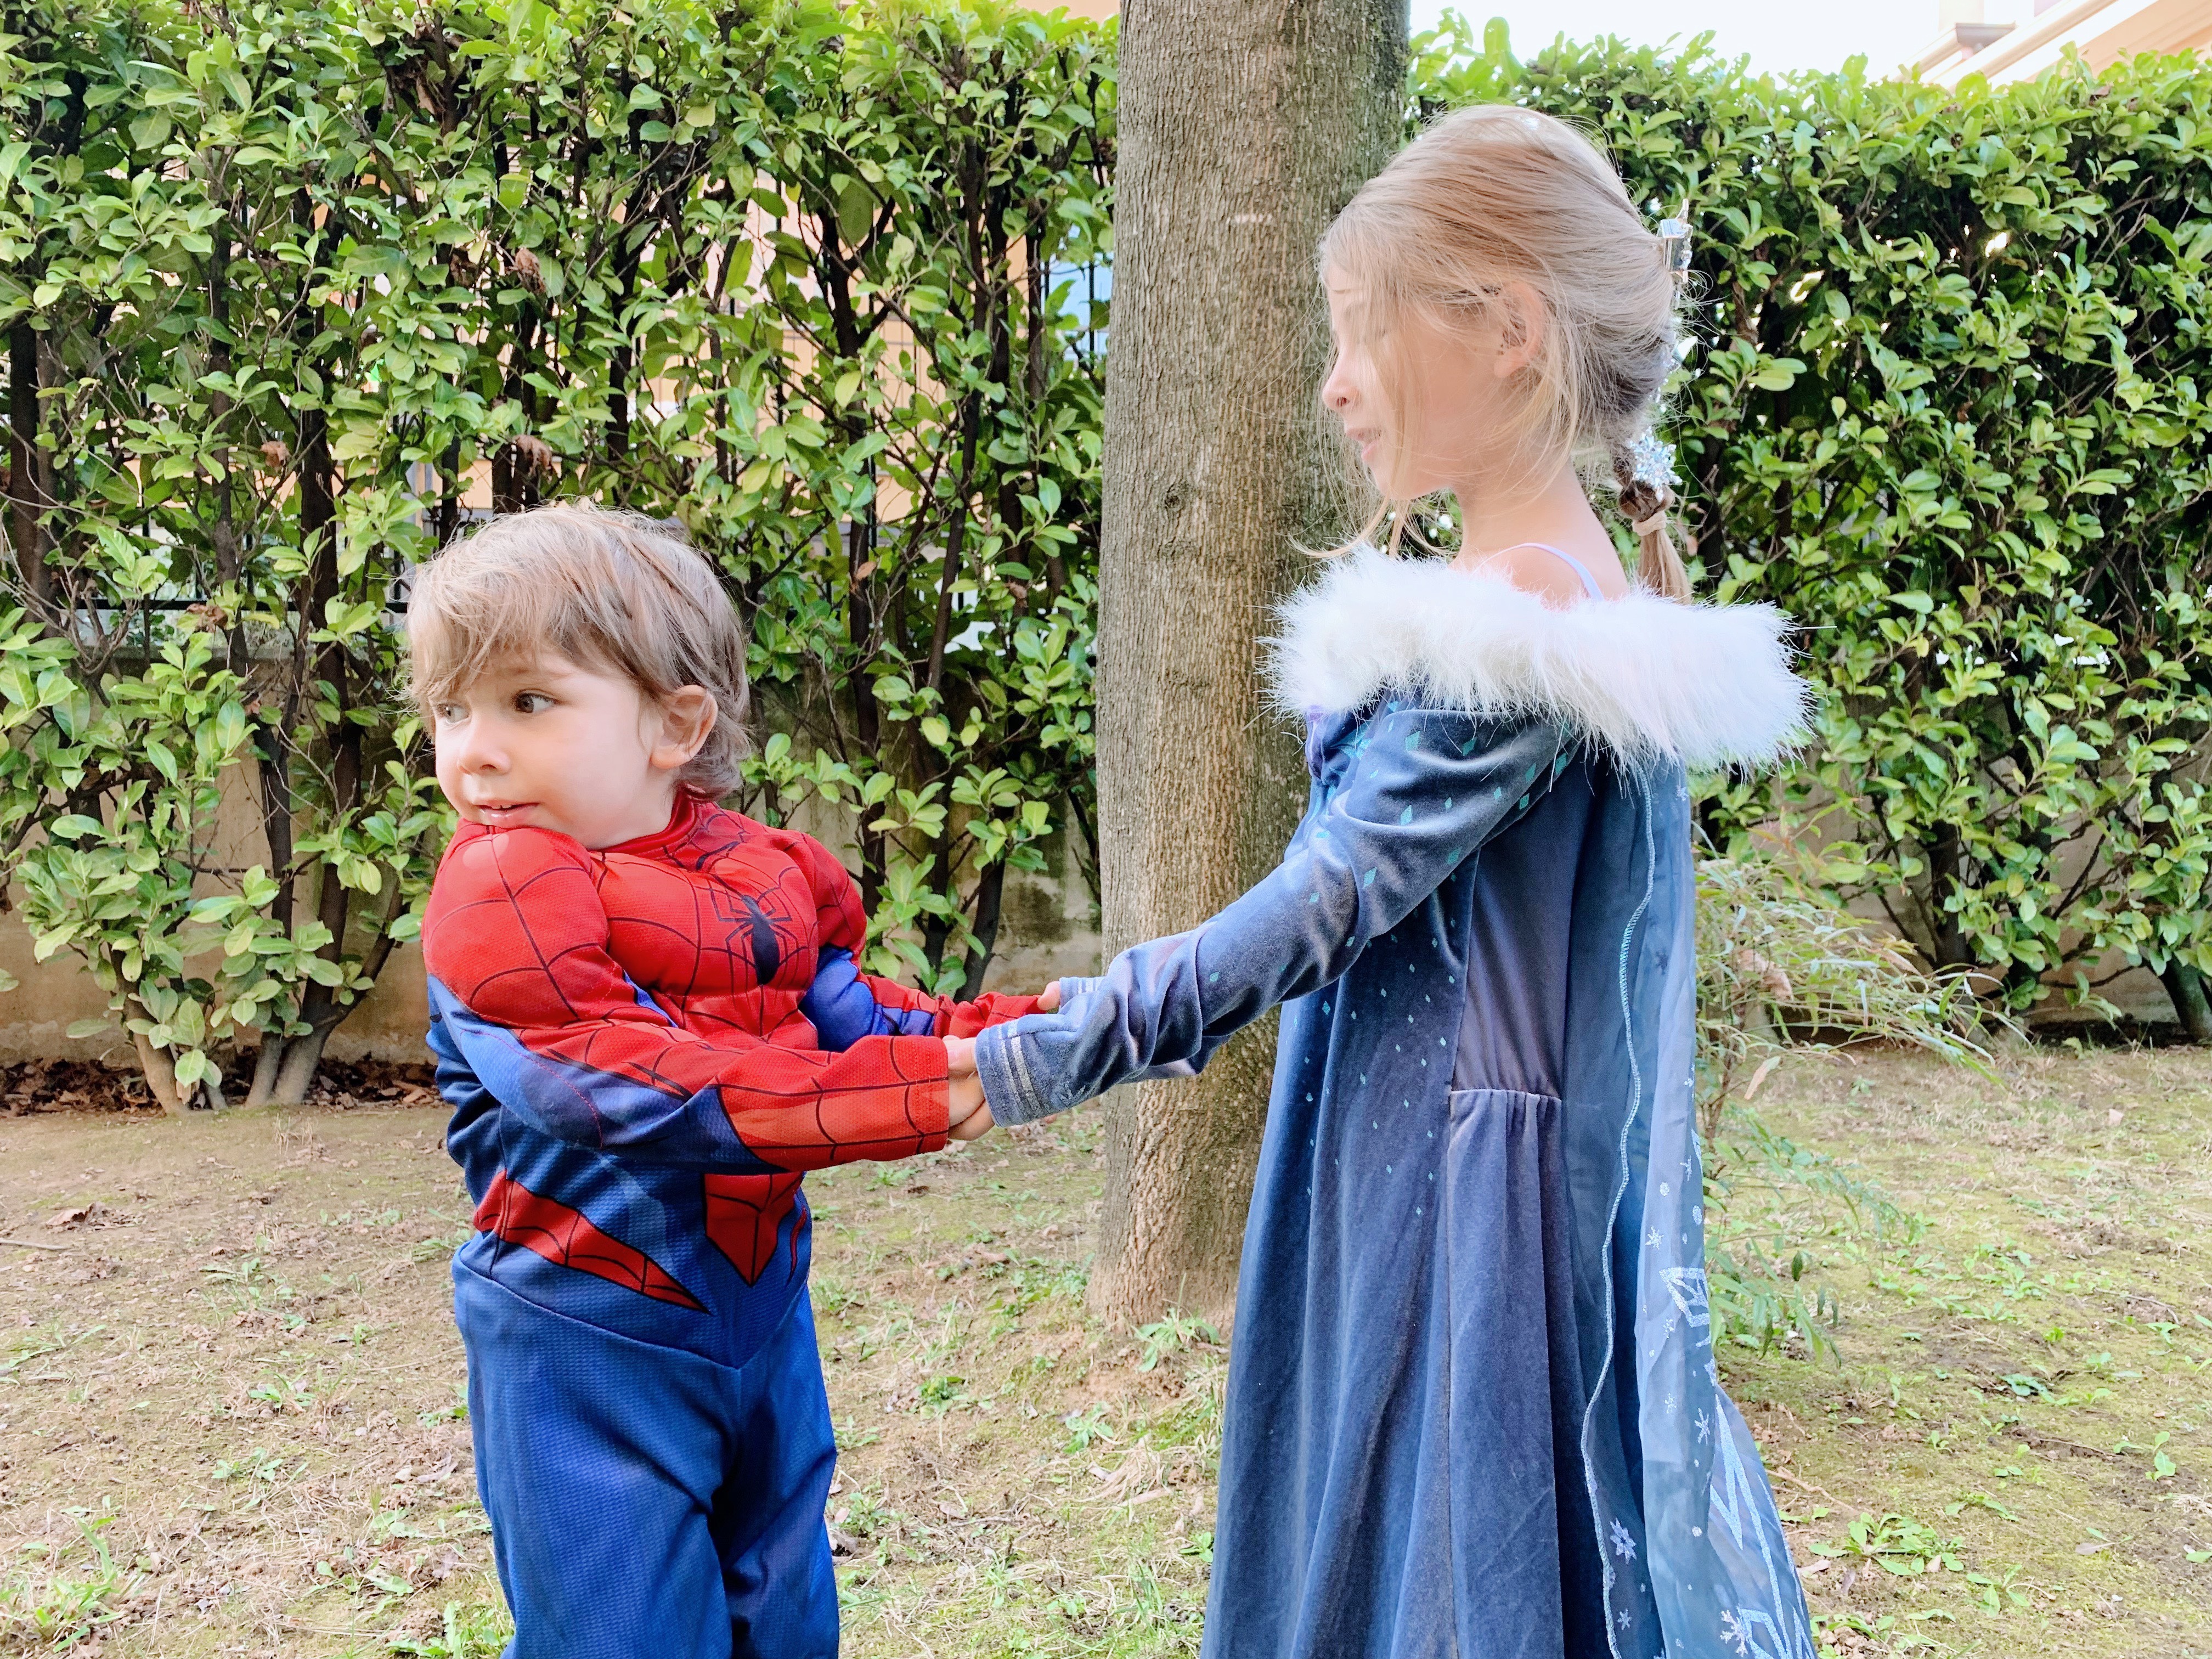 ammunition Drink water Person in charge of sports game Costumi Carnevale Disney principesse Frozen e supereroe Spiderman